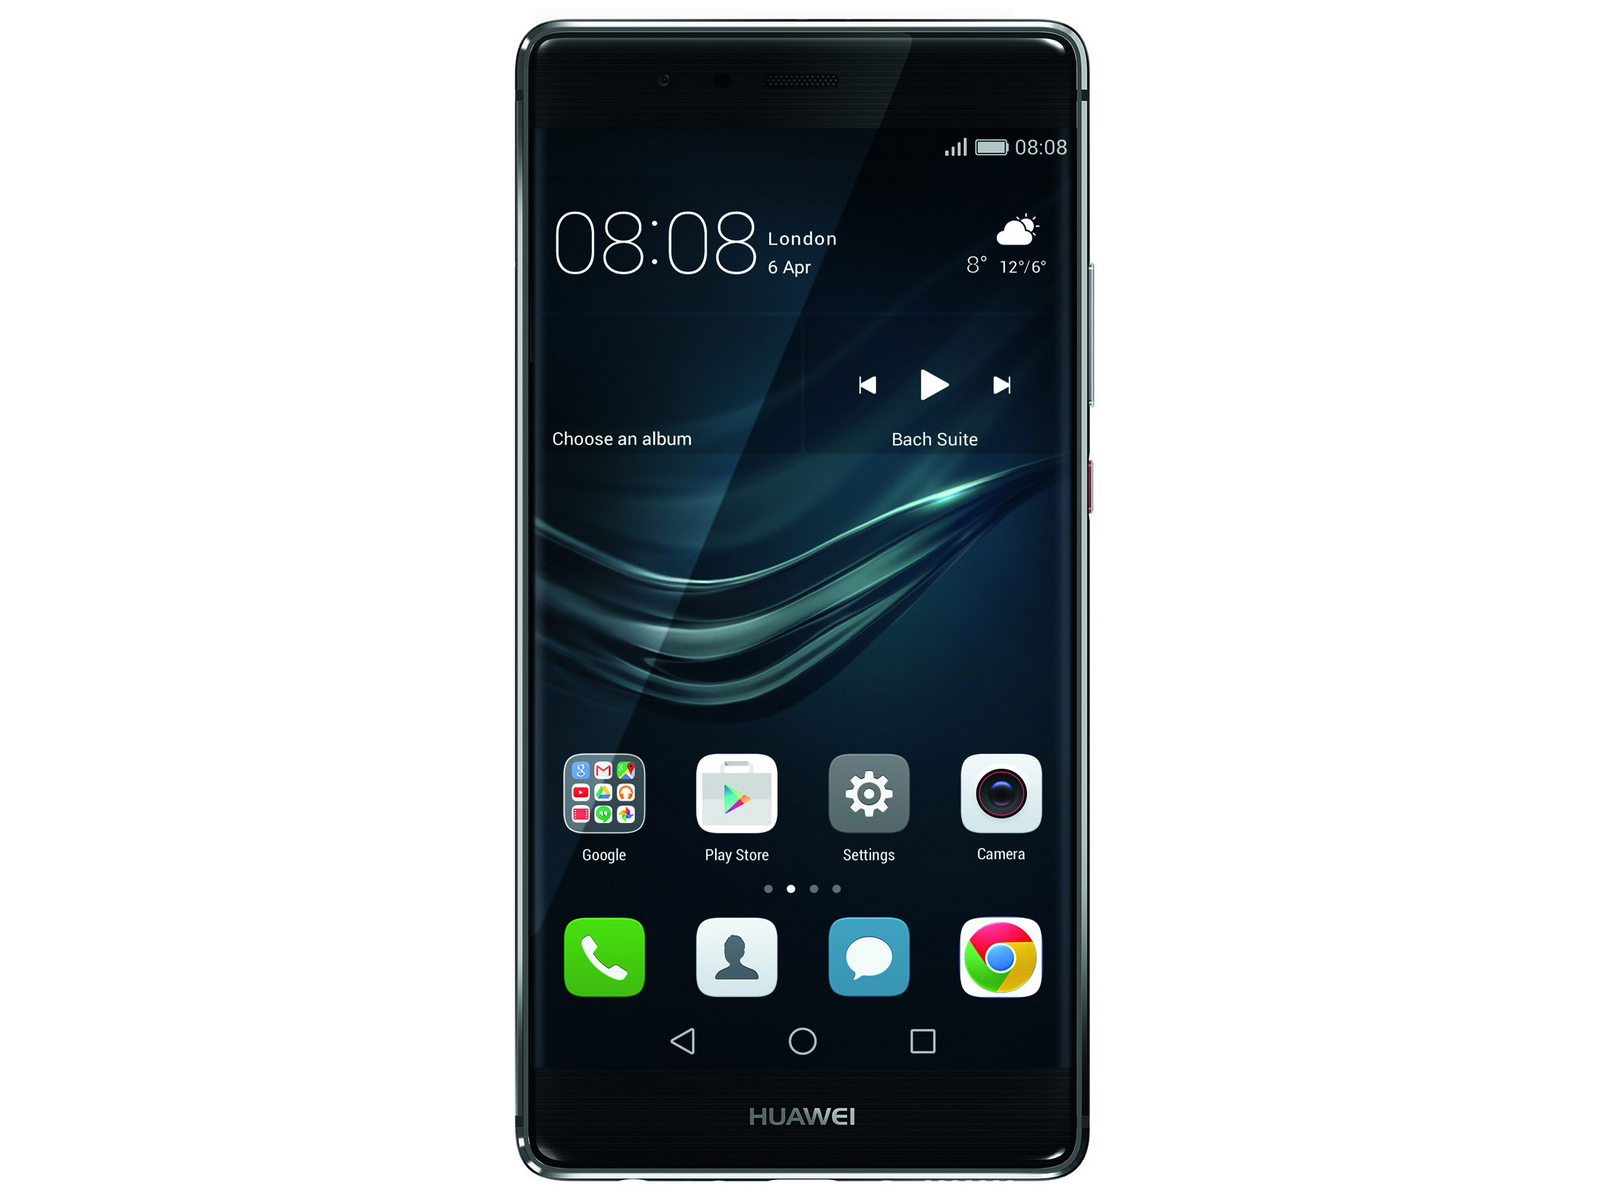 Voorganger bus Treble Huawei P9 Plus Smartphone Review - NotebookCheck.net Reviews